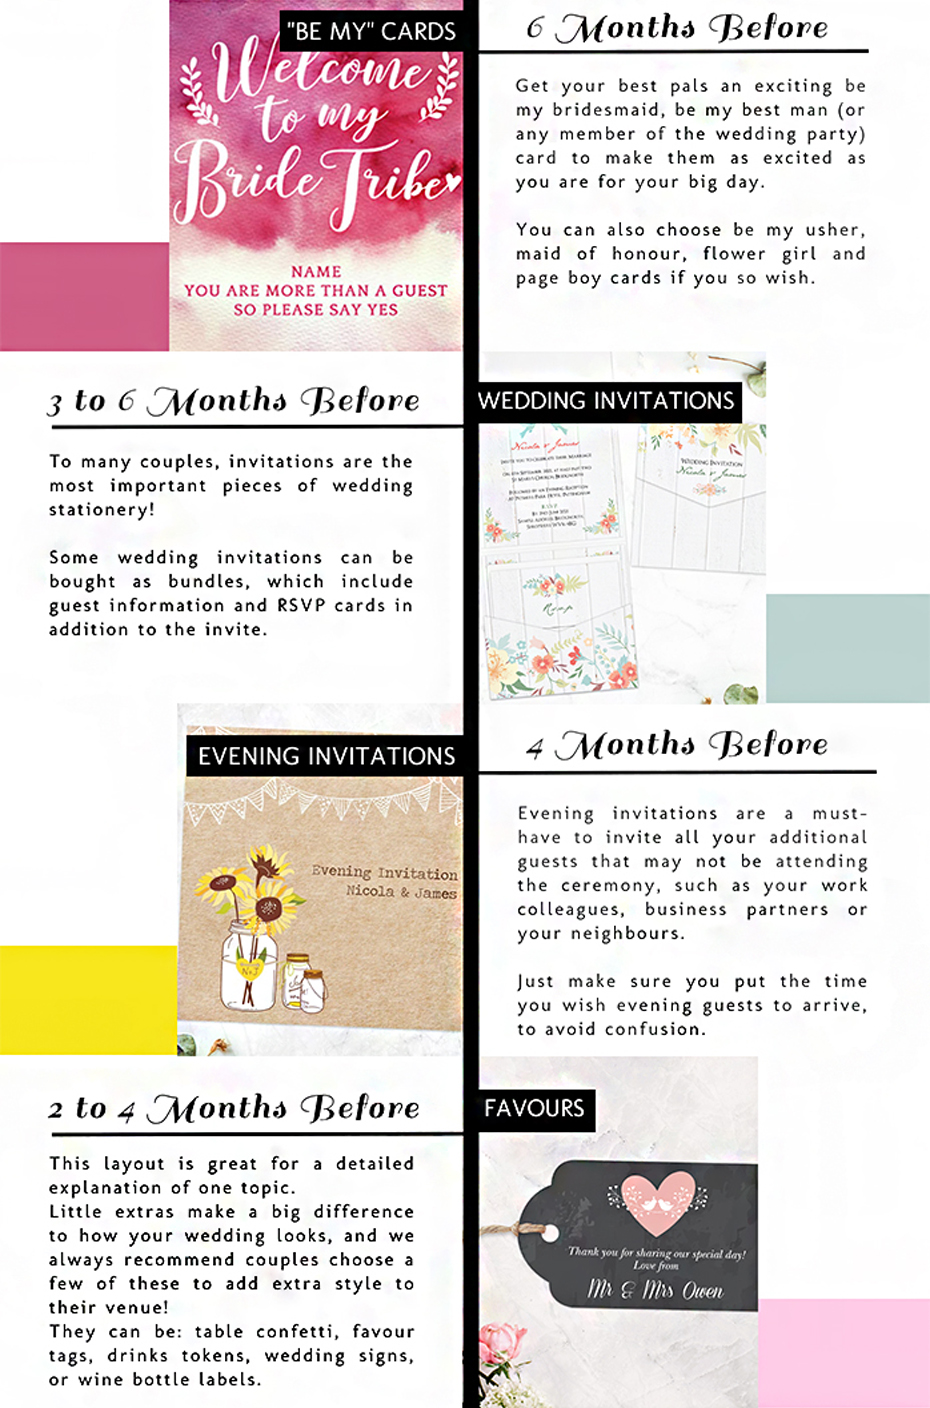 wedding stationery timeline, 6 months before to 2 months before